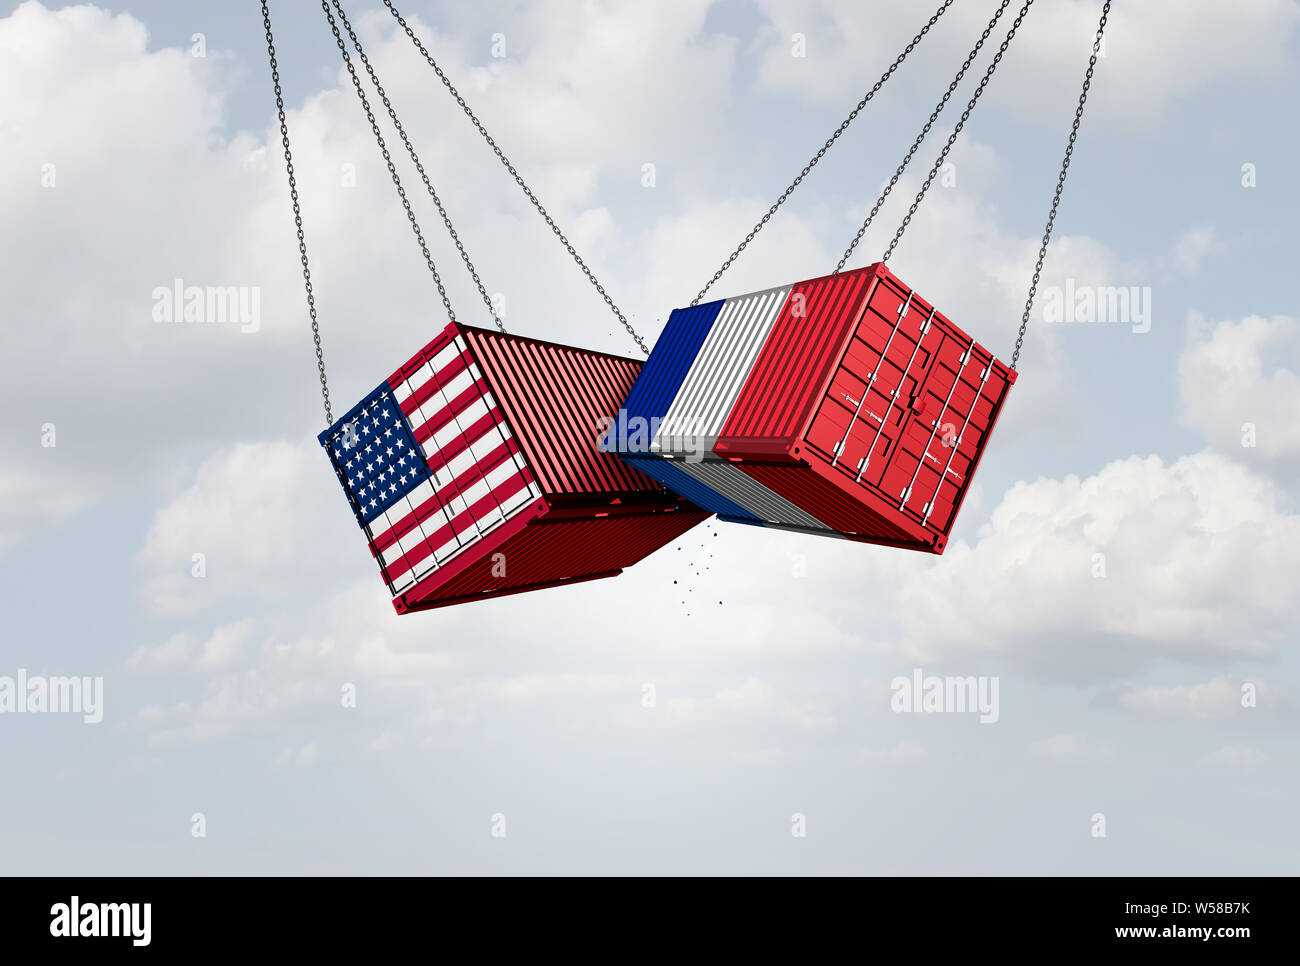 France USA trade war and American tariffs global trade dispute as two opposing cargo freight containers in French tax economic conflict over import. Stock Photo